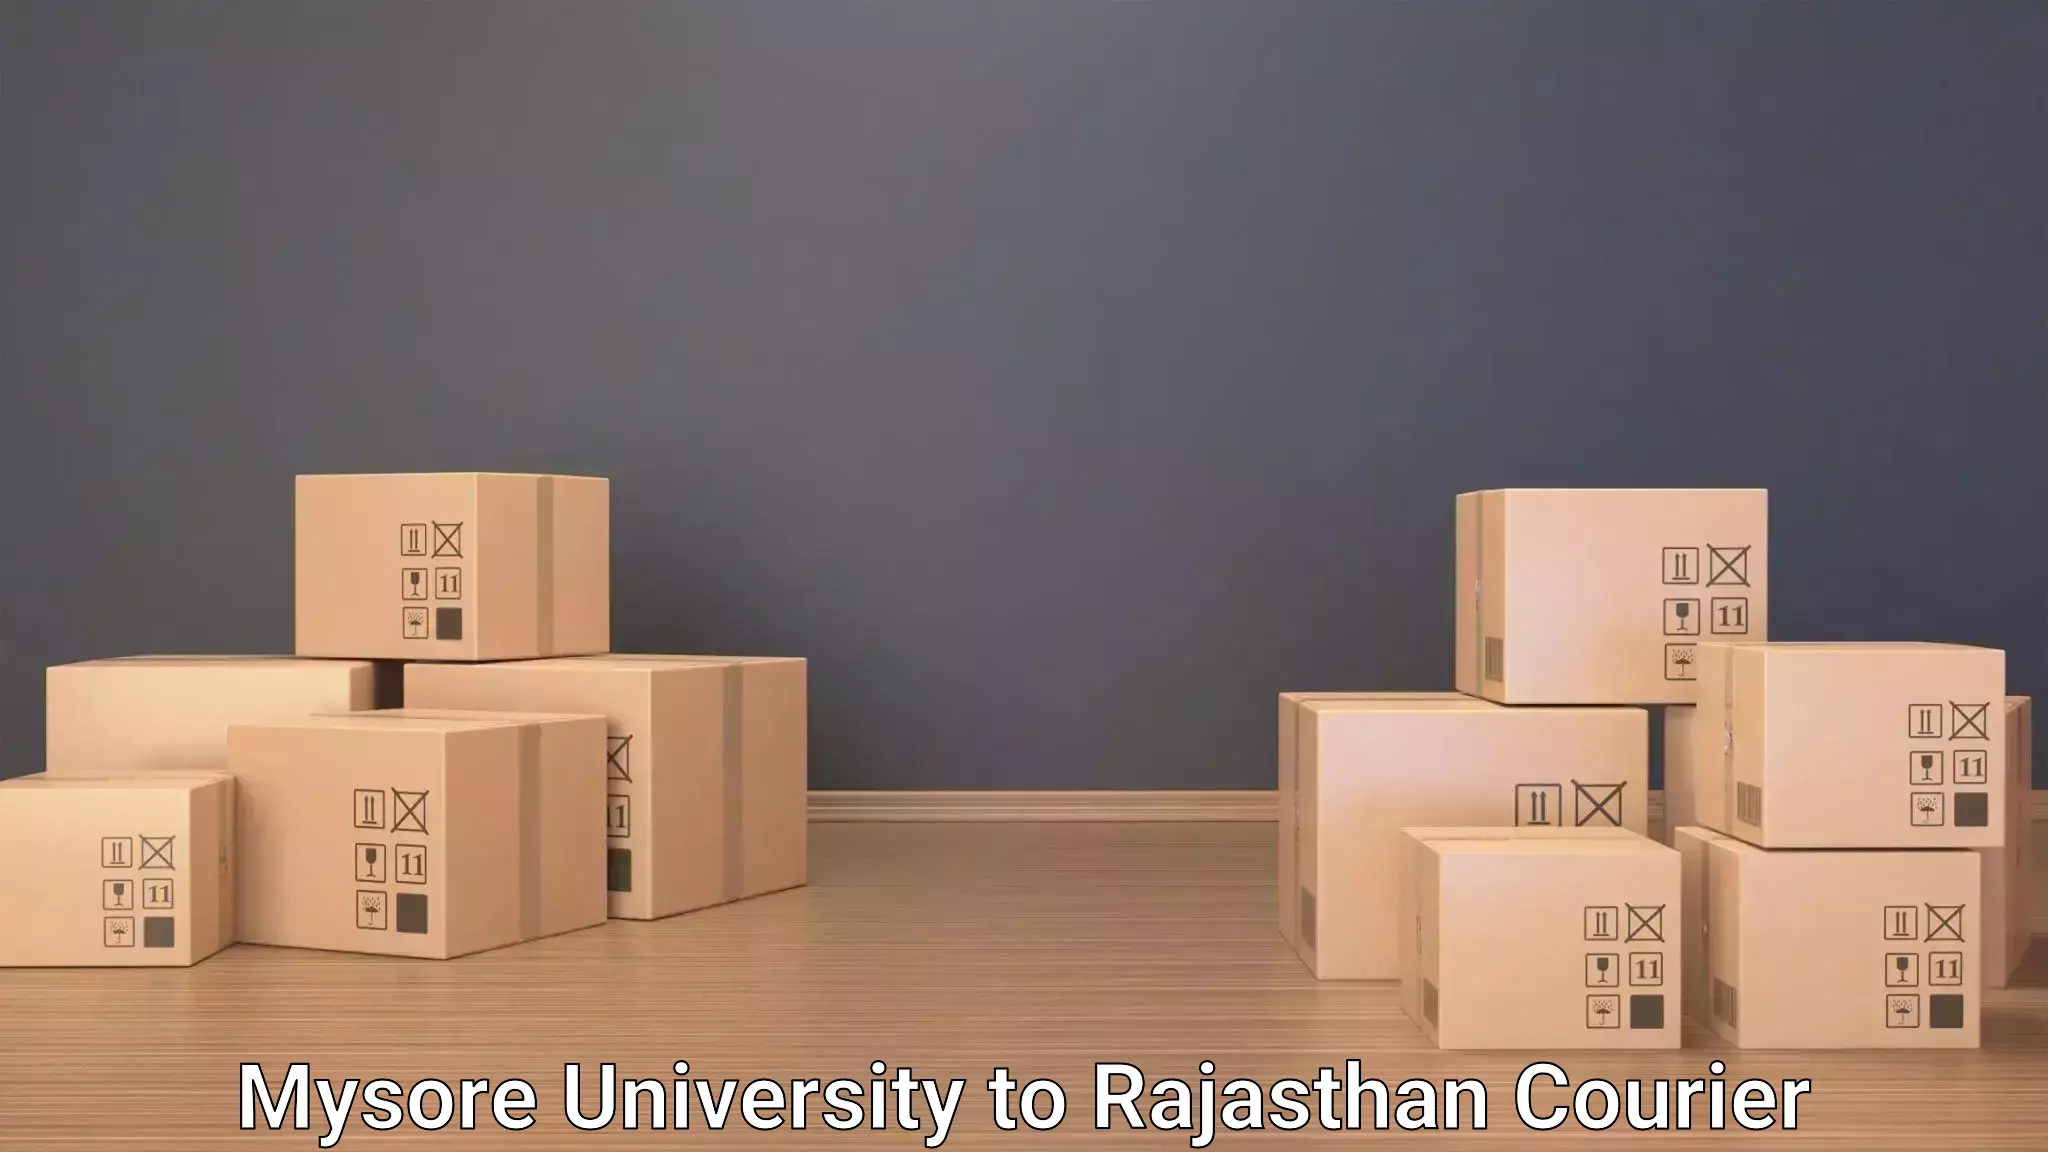 Baggage delivery support Mysore University to Jawahar Nagar